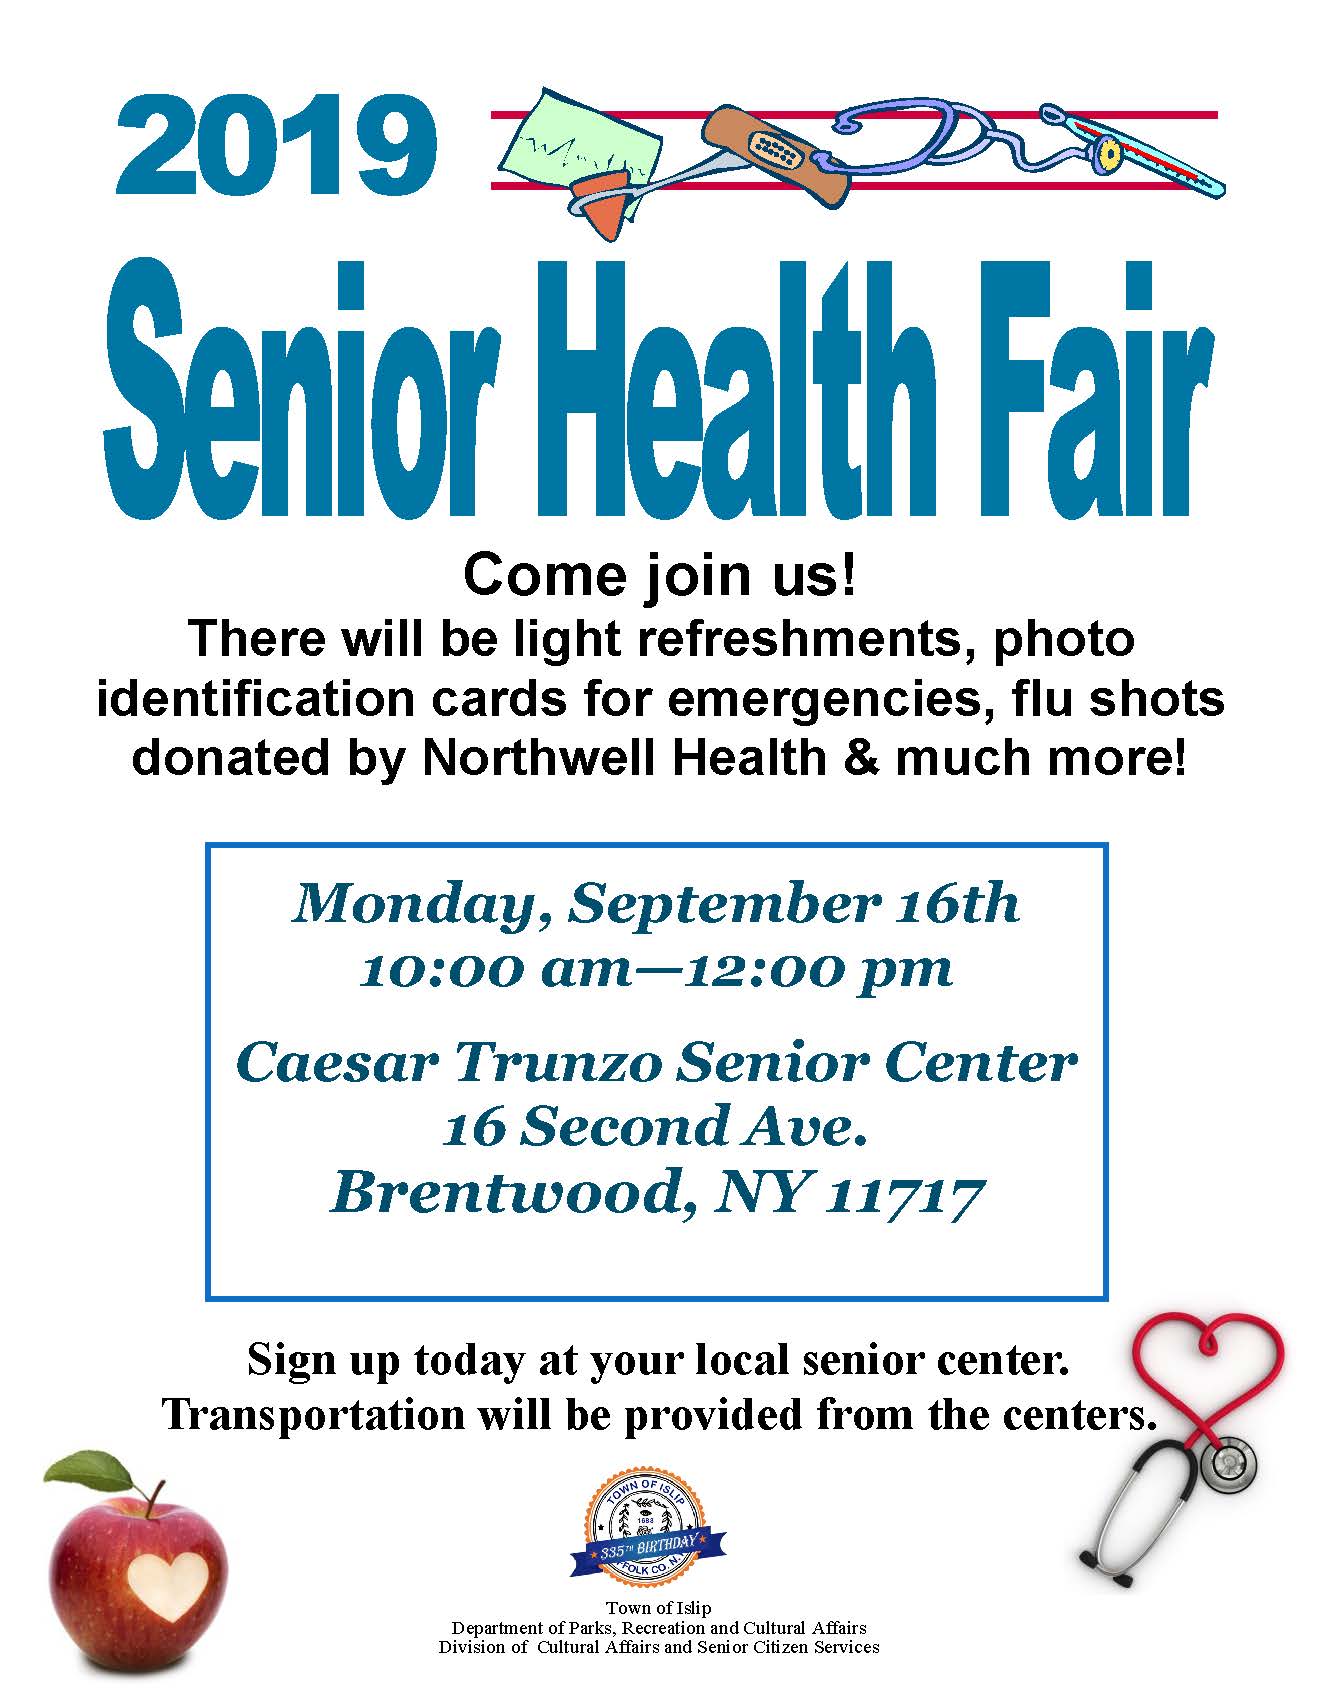 A flyer announcing the Senior Health Fair to take place Monday September 16th from 10am to 12 pm at the Caesar Trunzo Senior Center.